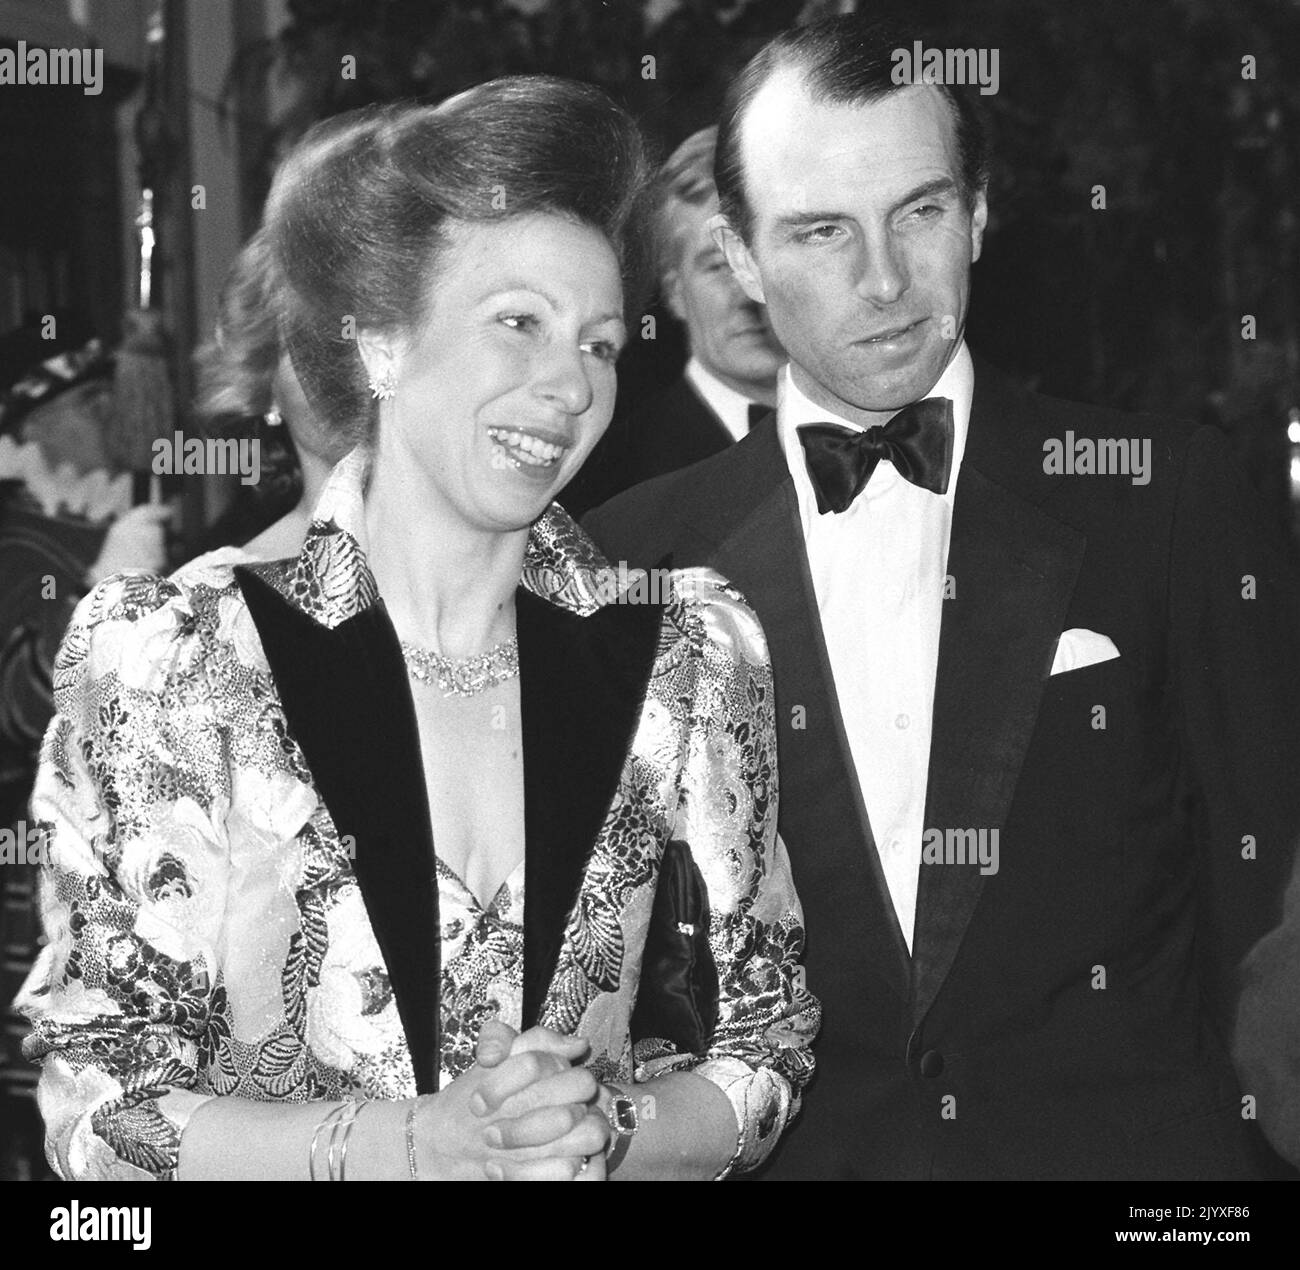 File photo dated 21/4/1986 of the Princess Royal and Captain Mark Phillips at the Royal Opera House in London. The Queen's Annus Horribilis speech at Guildhall on 24 November, 1992, marking 40 years on the throne, followed a year which had seen the Prince and Princess of Wales at war, the Duke and Duchess of York separated, Princess Anne divorced, Windsor Castle went up in flames and the publication of Andrew Morton's book: 'Diana: Her True Story'. In December the Prince and Princess of Wales formally separated. Issue date: Thursday September 8, 2022. Stock Photo